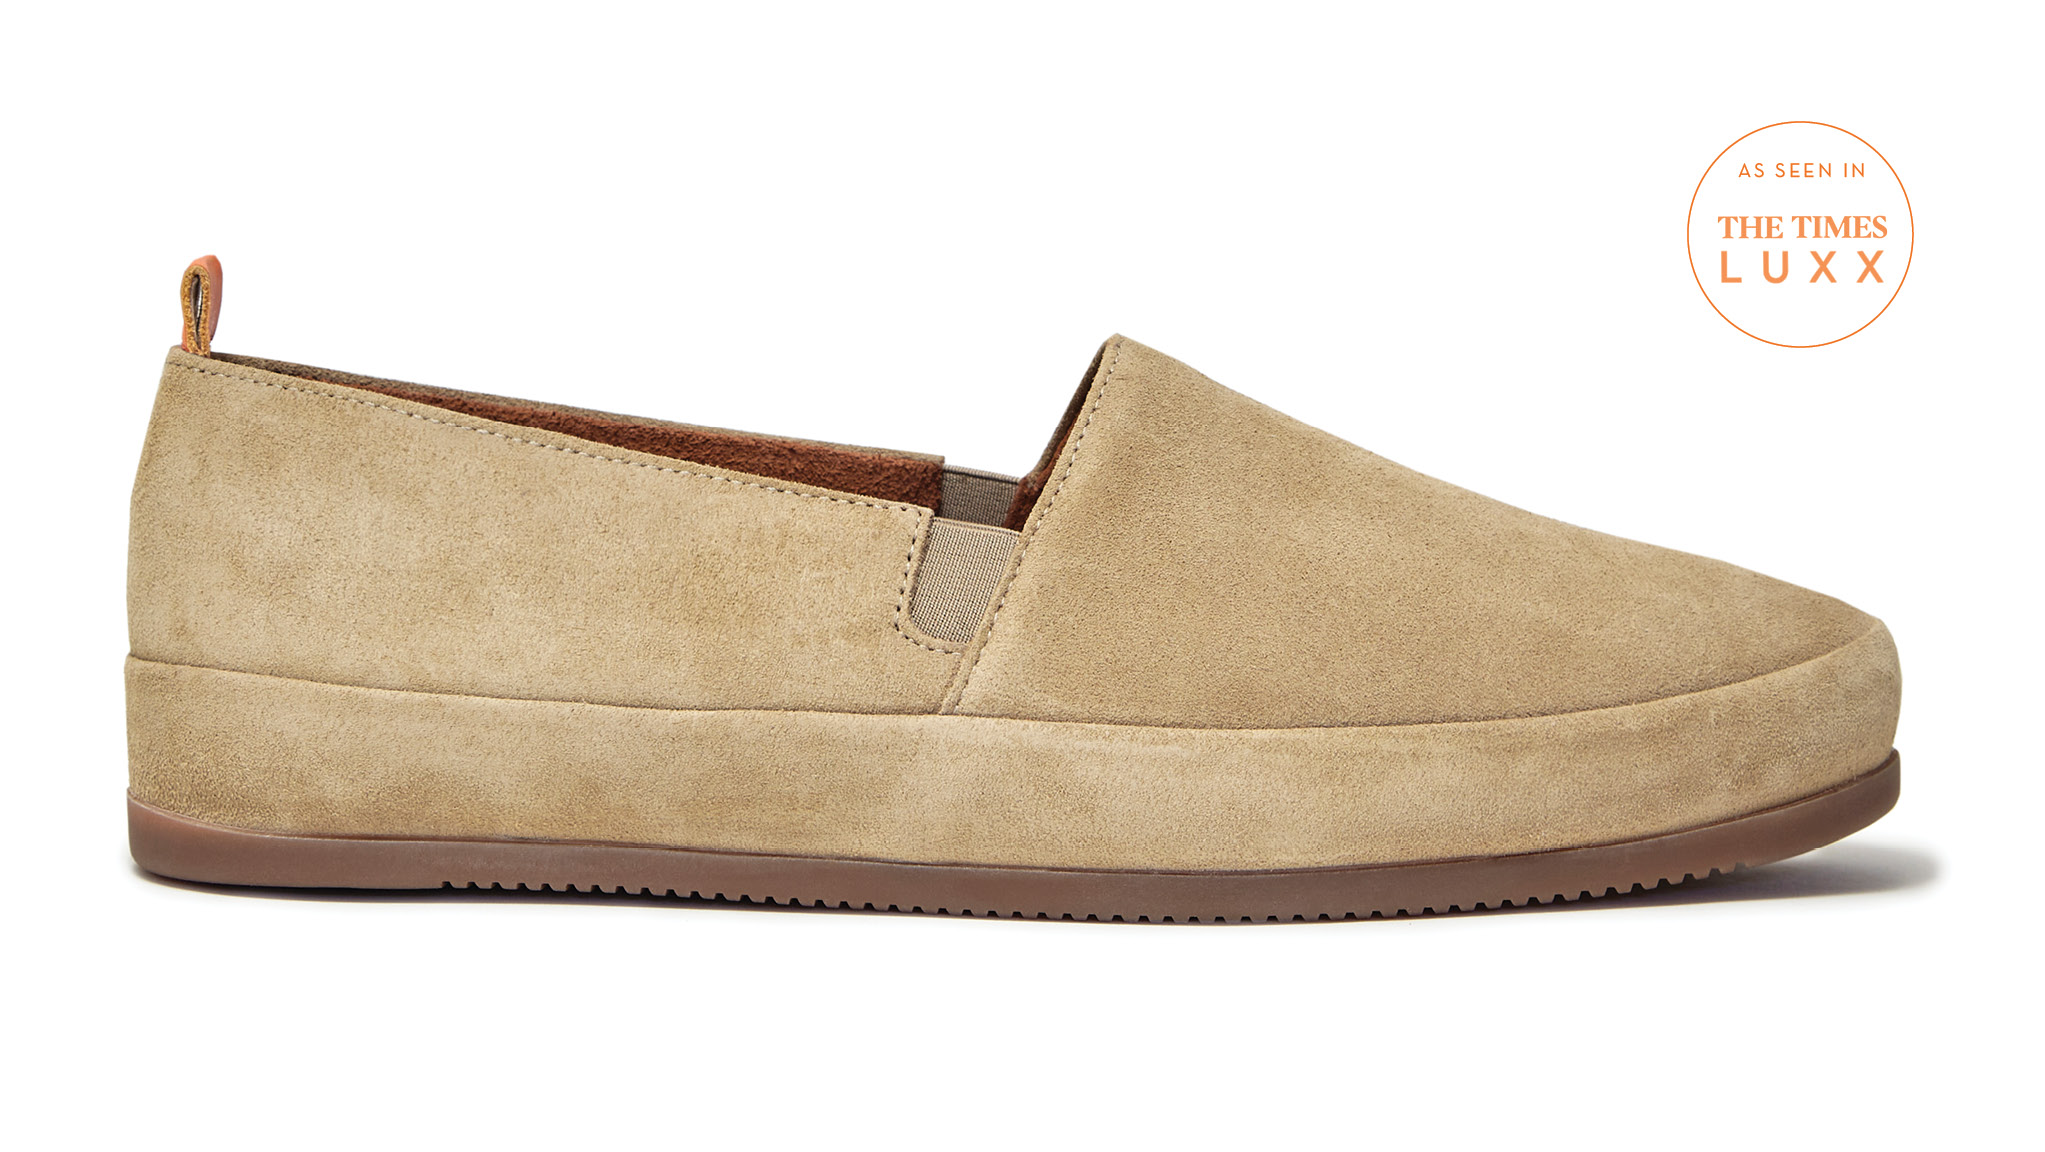 The Loafer in Tan Suede - Men's Suede Loafers